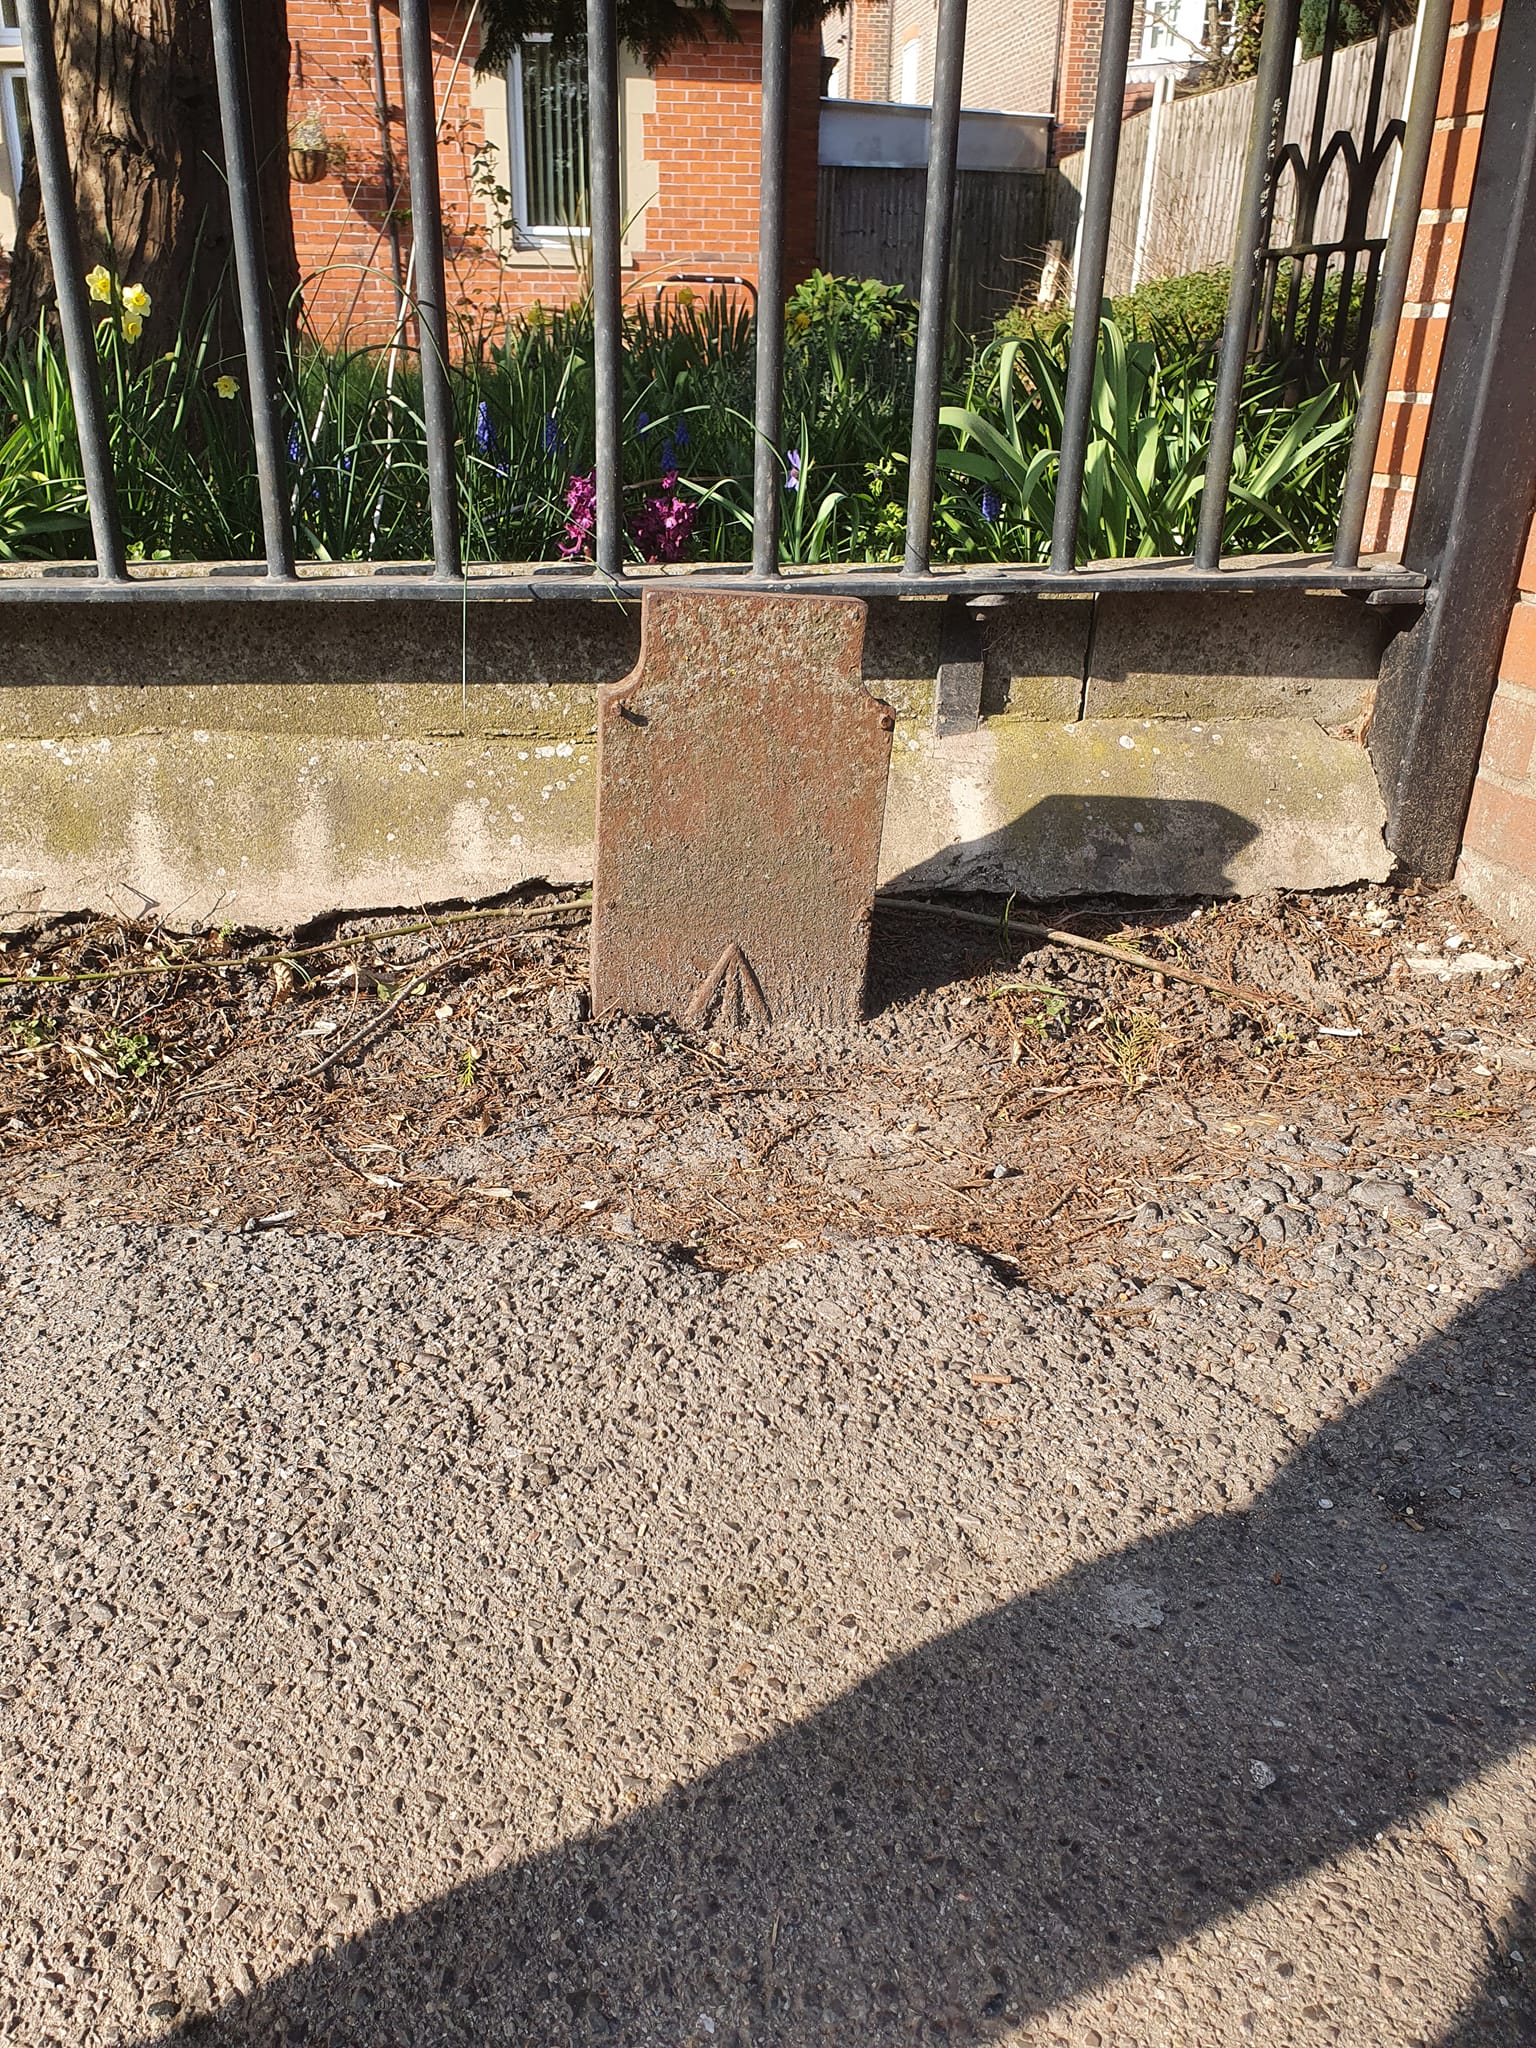 Telegraph cable marker post at 2 St Johns Road, Newbury by Jo Murray 